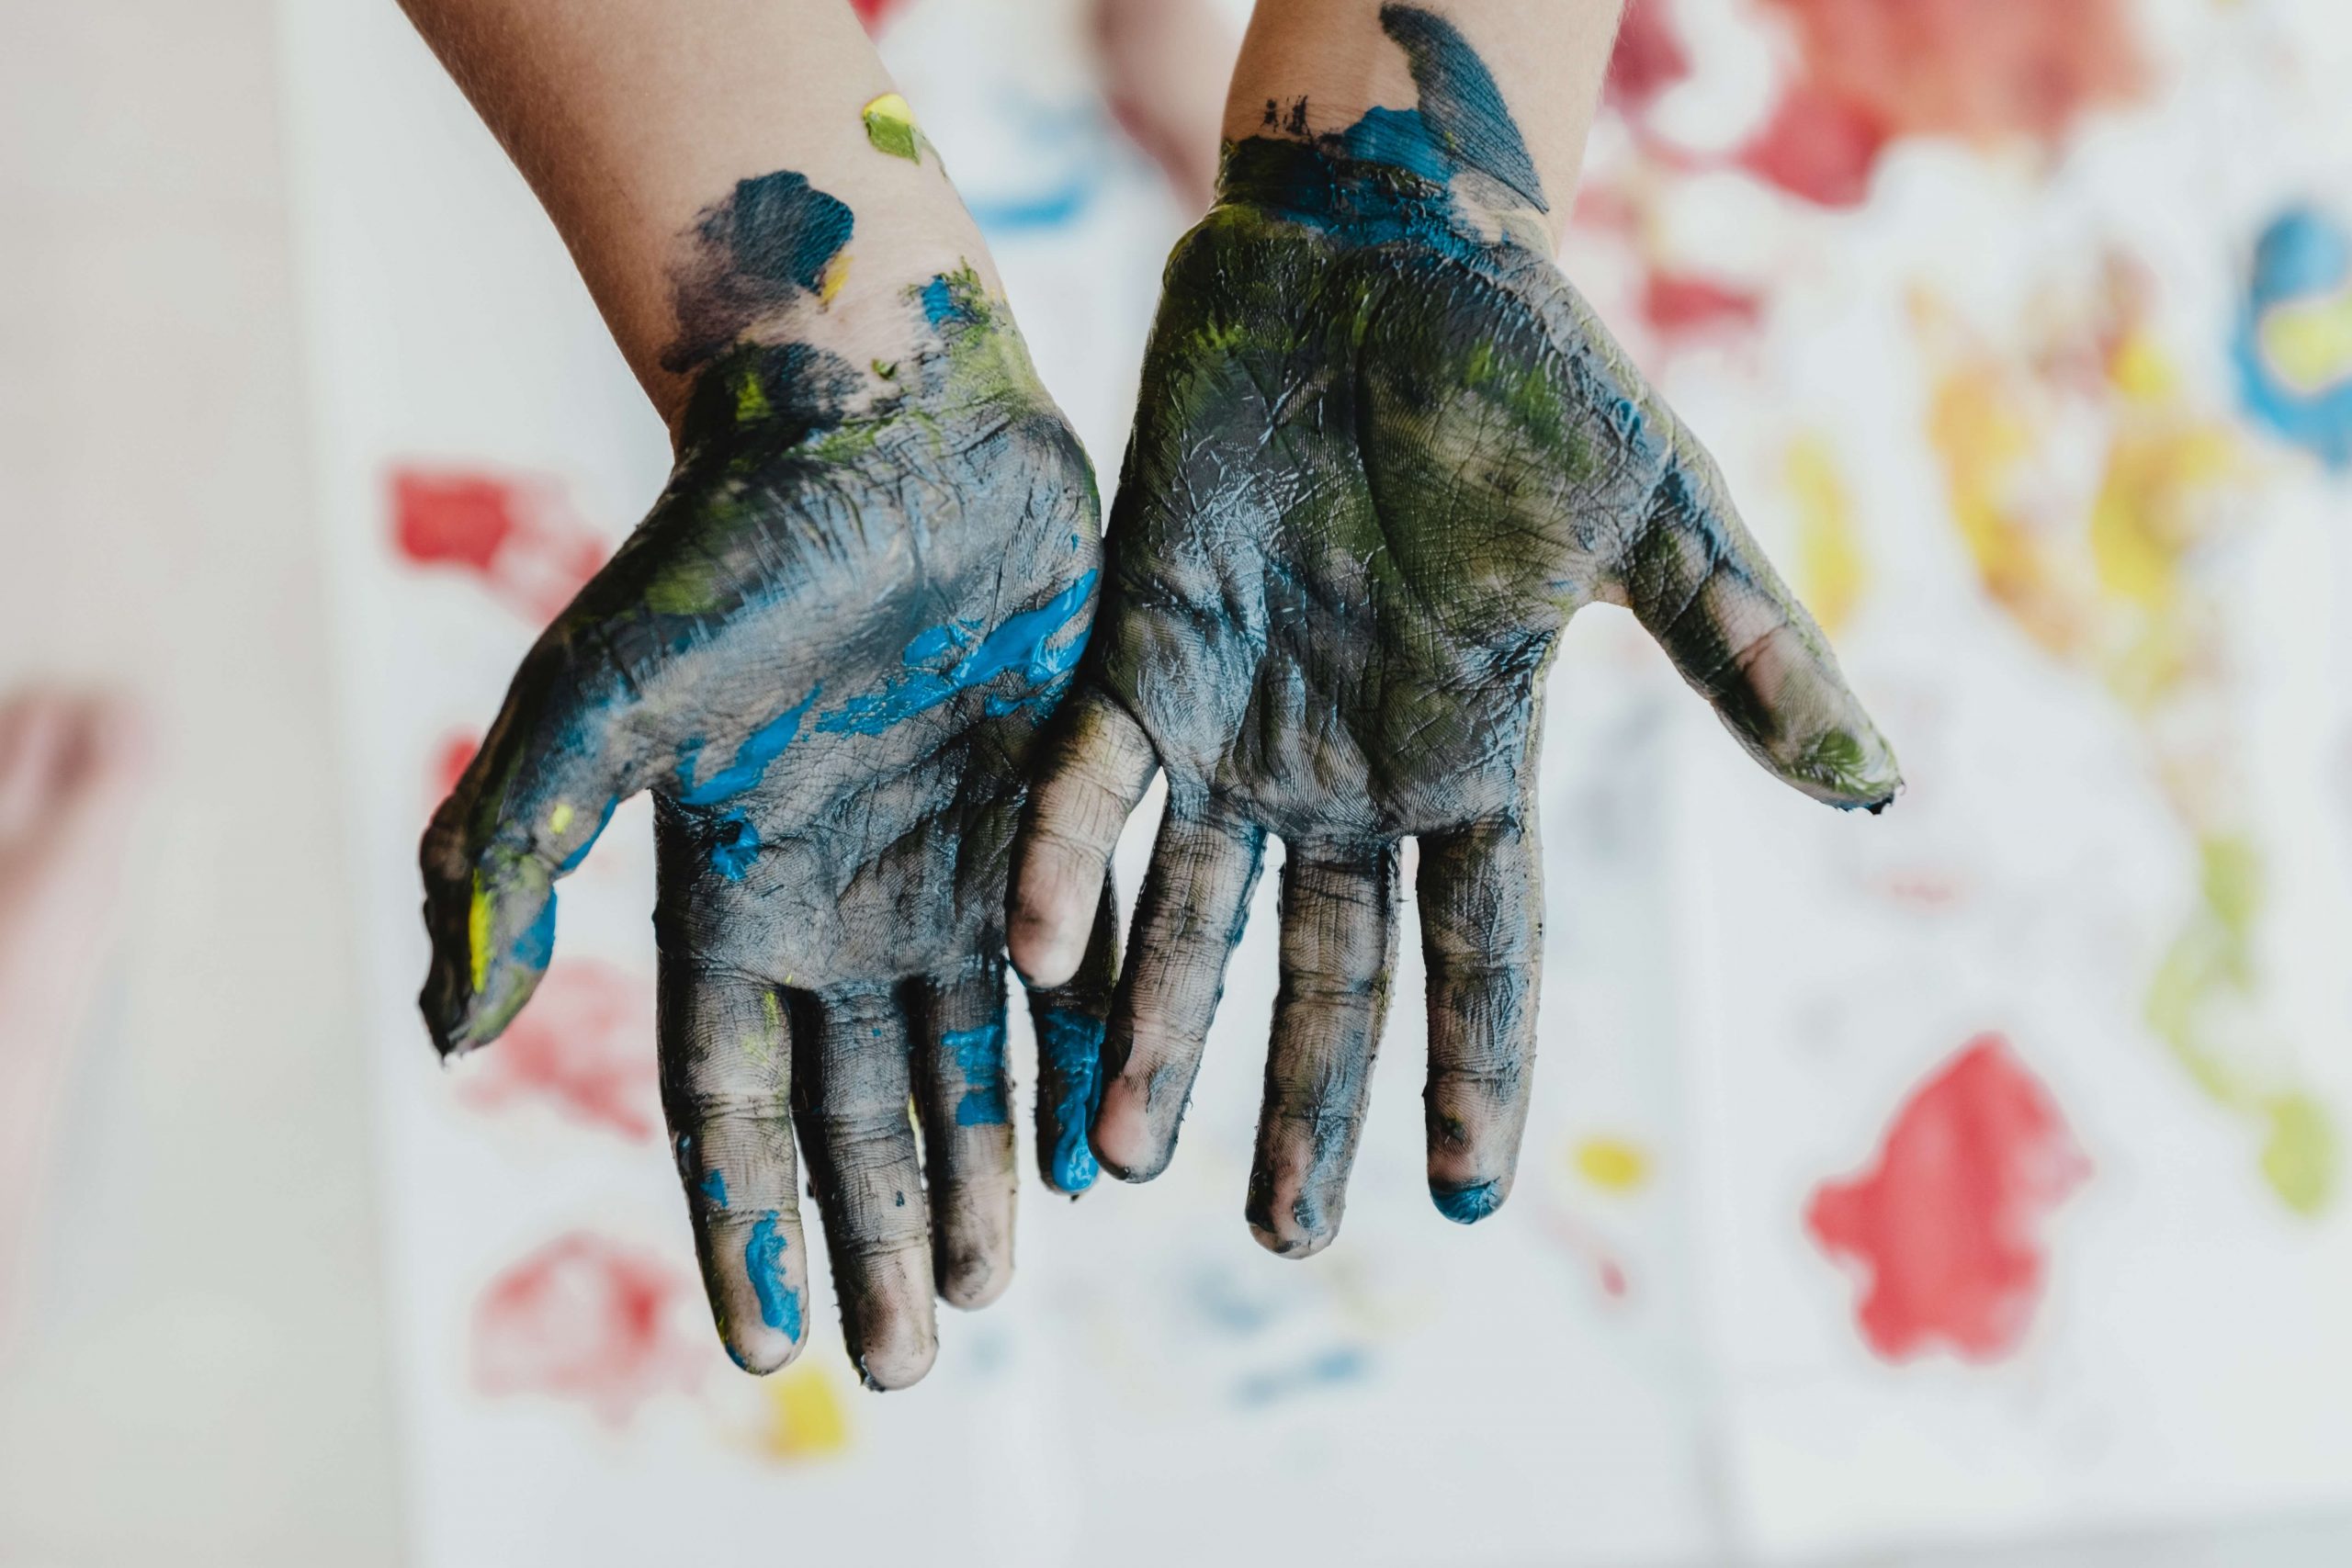 hands covered in messy paint